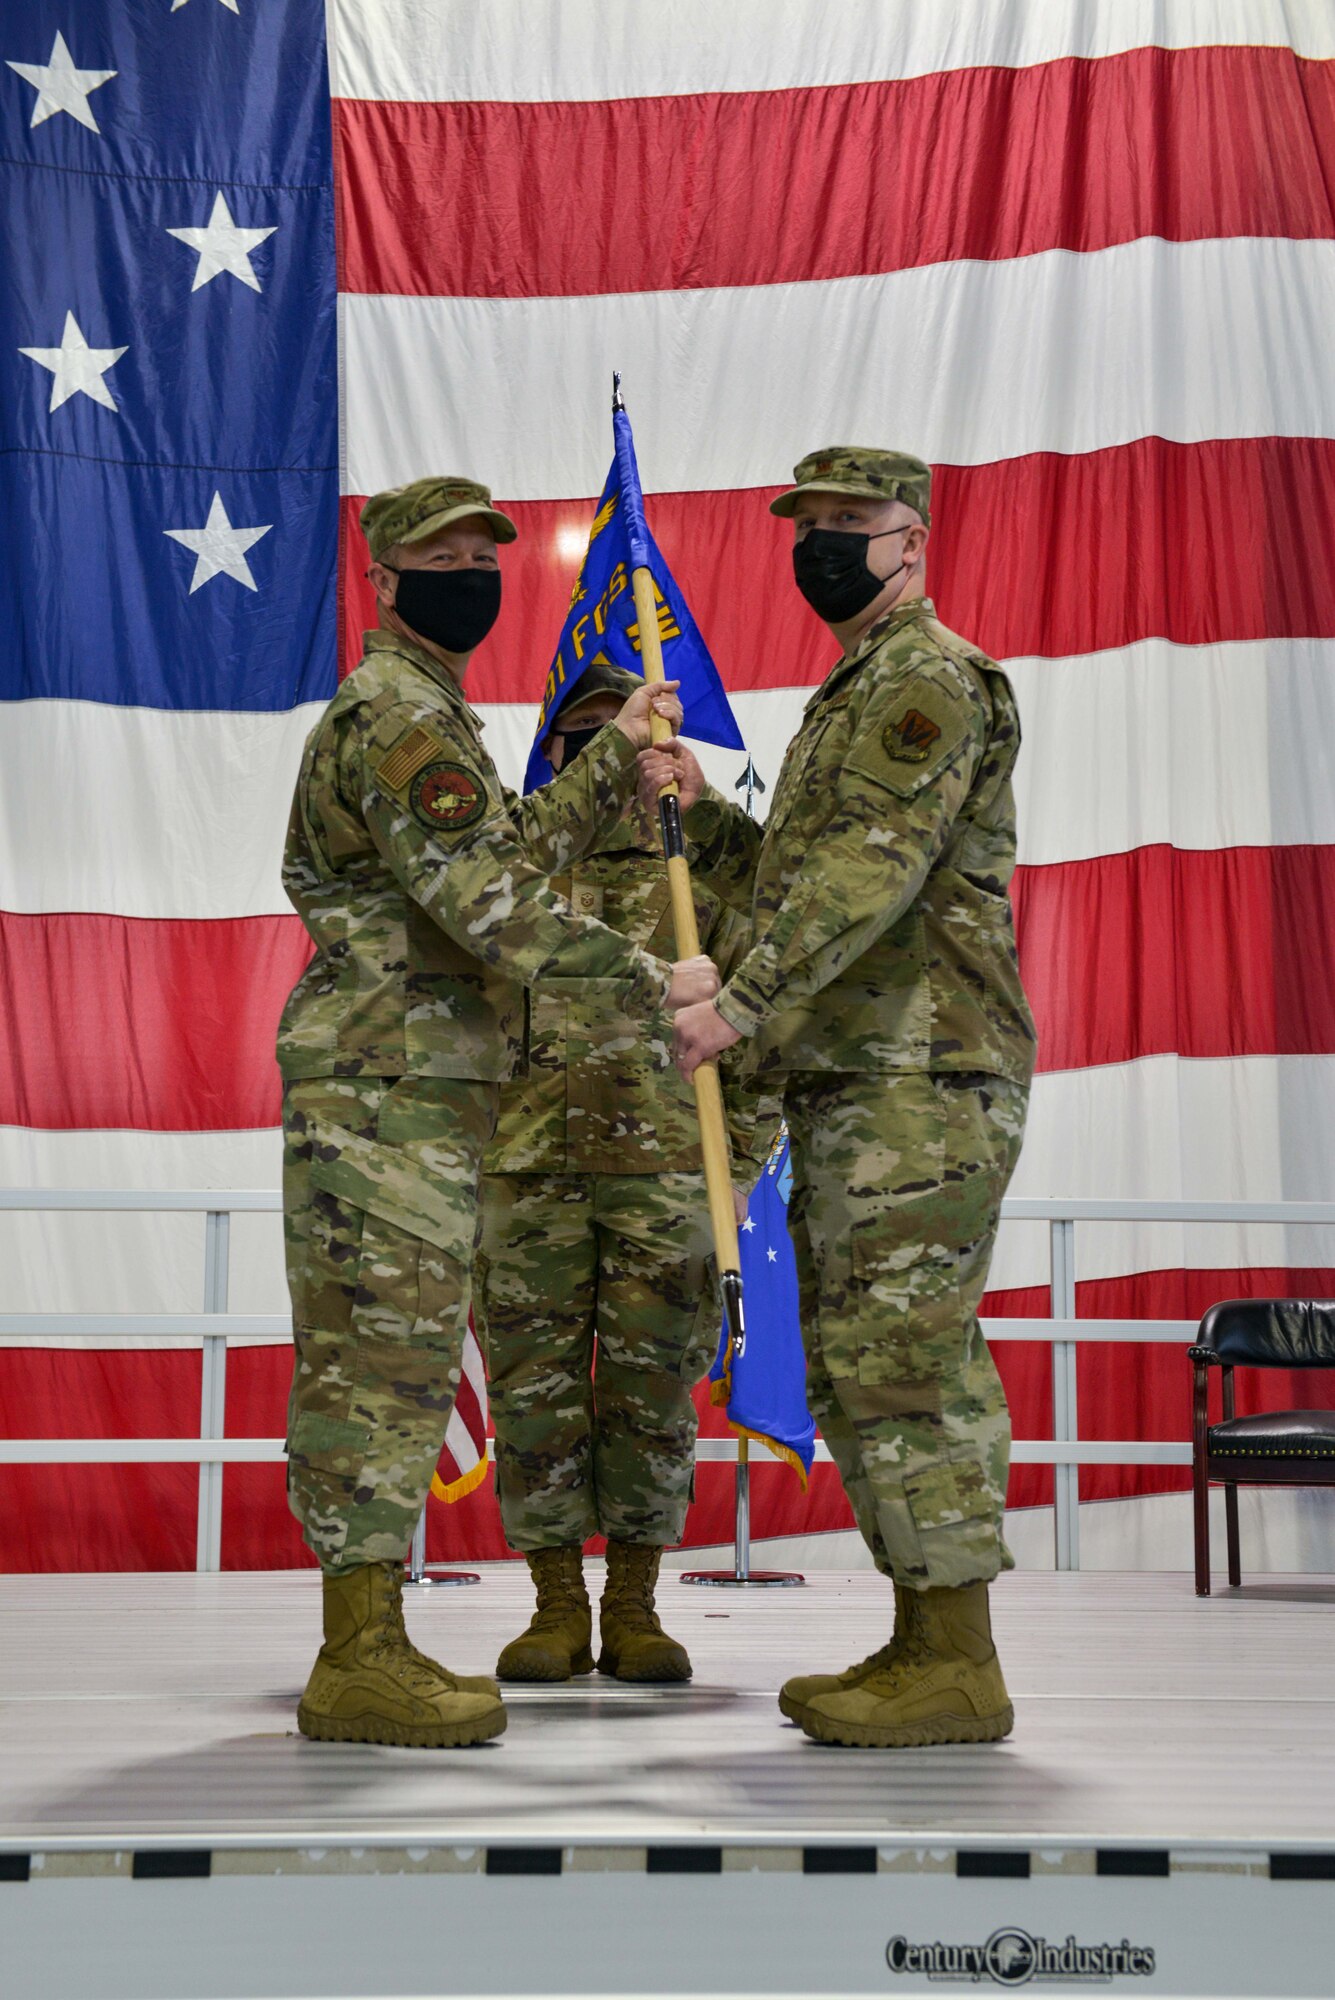 U.S. Air Force Maj. Jeremy Geidel (right), 391st Fighter Generation Squadron, assumes command from Col. Ernesto DiVittorio (left), 366th Fighter Wing commander, of the 391st Fighter Generation Squadron on Mountain Home Air Force Base, Idaho, Dec. 3, 2021. The activation of the 391st FGS brings the 366th Fighter Wing in line with Air Combat Command’s Combat Oriented Maintenance Organization model.